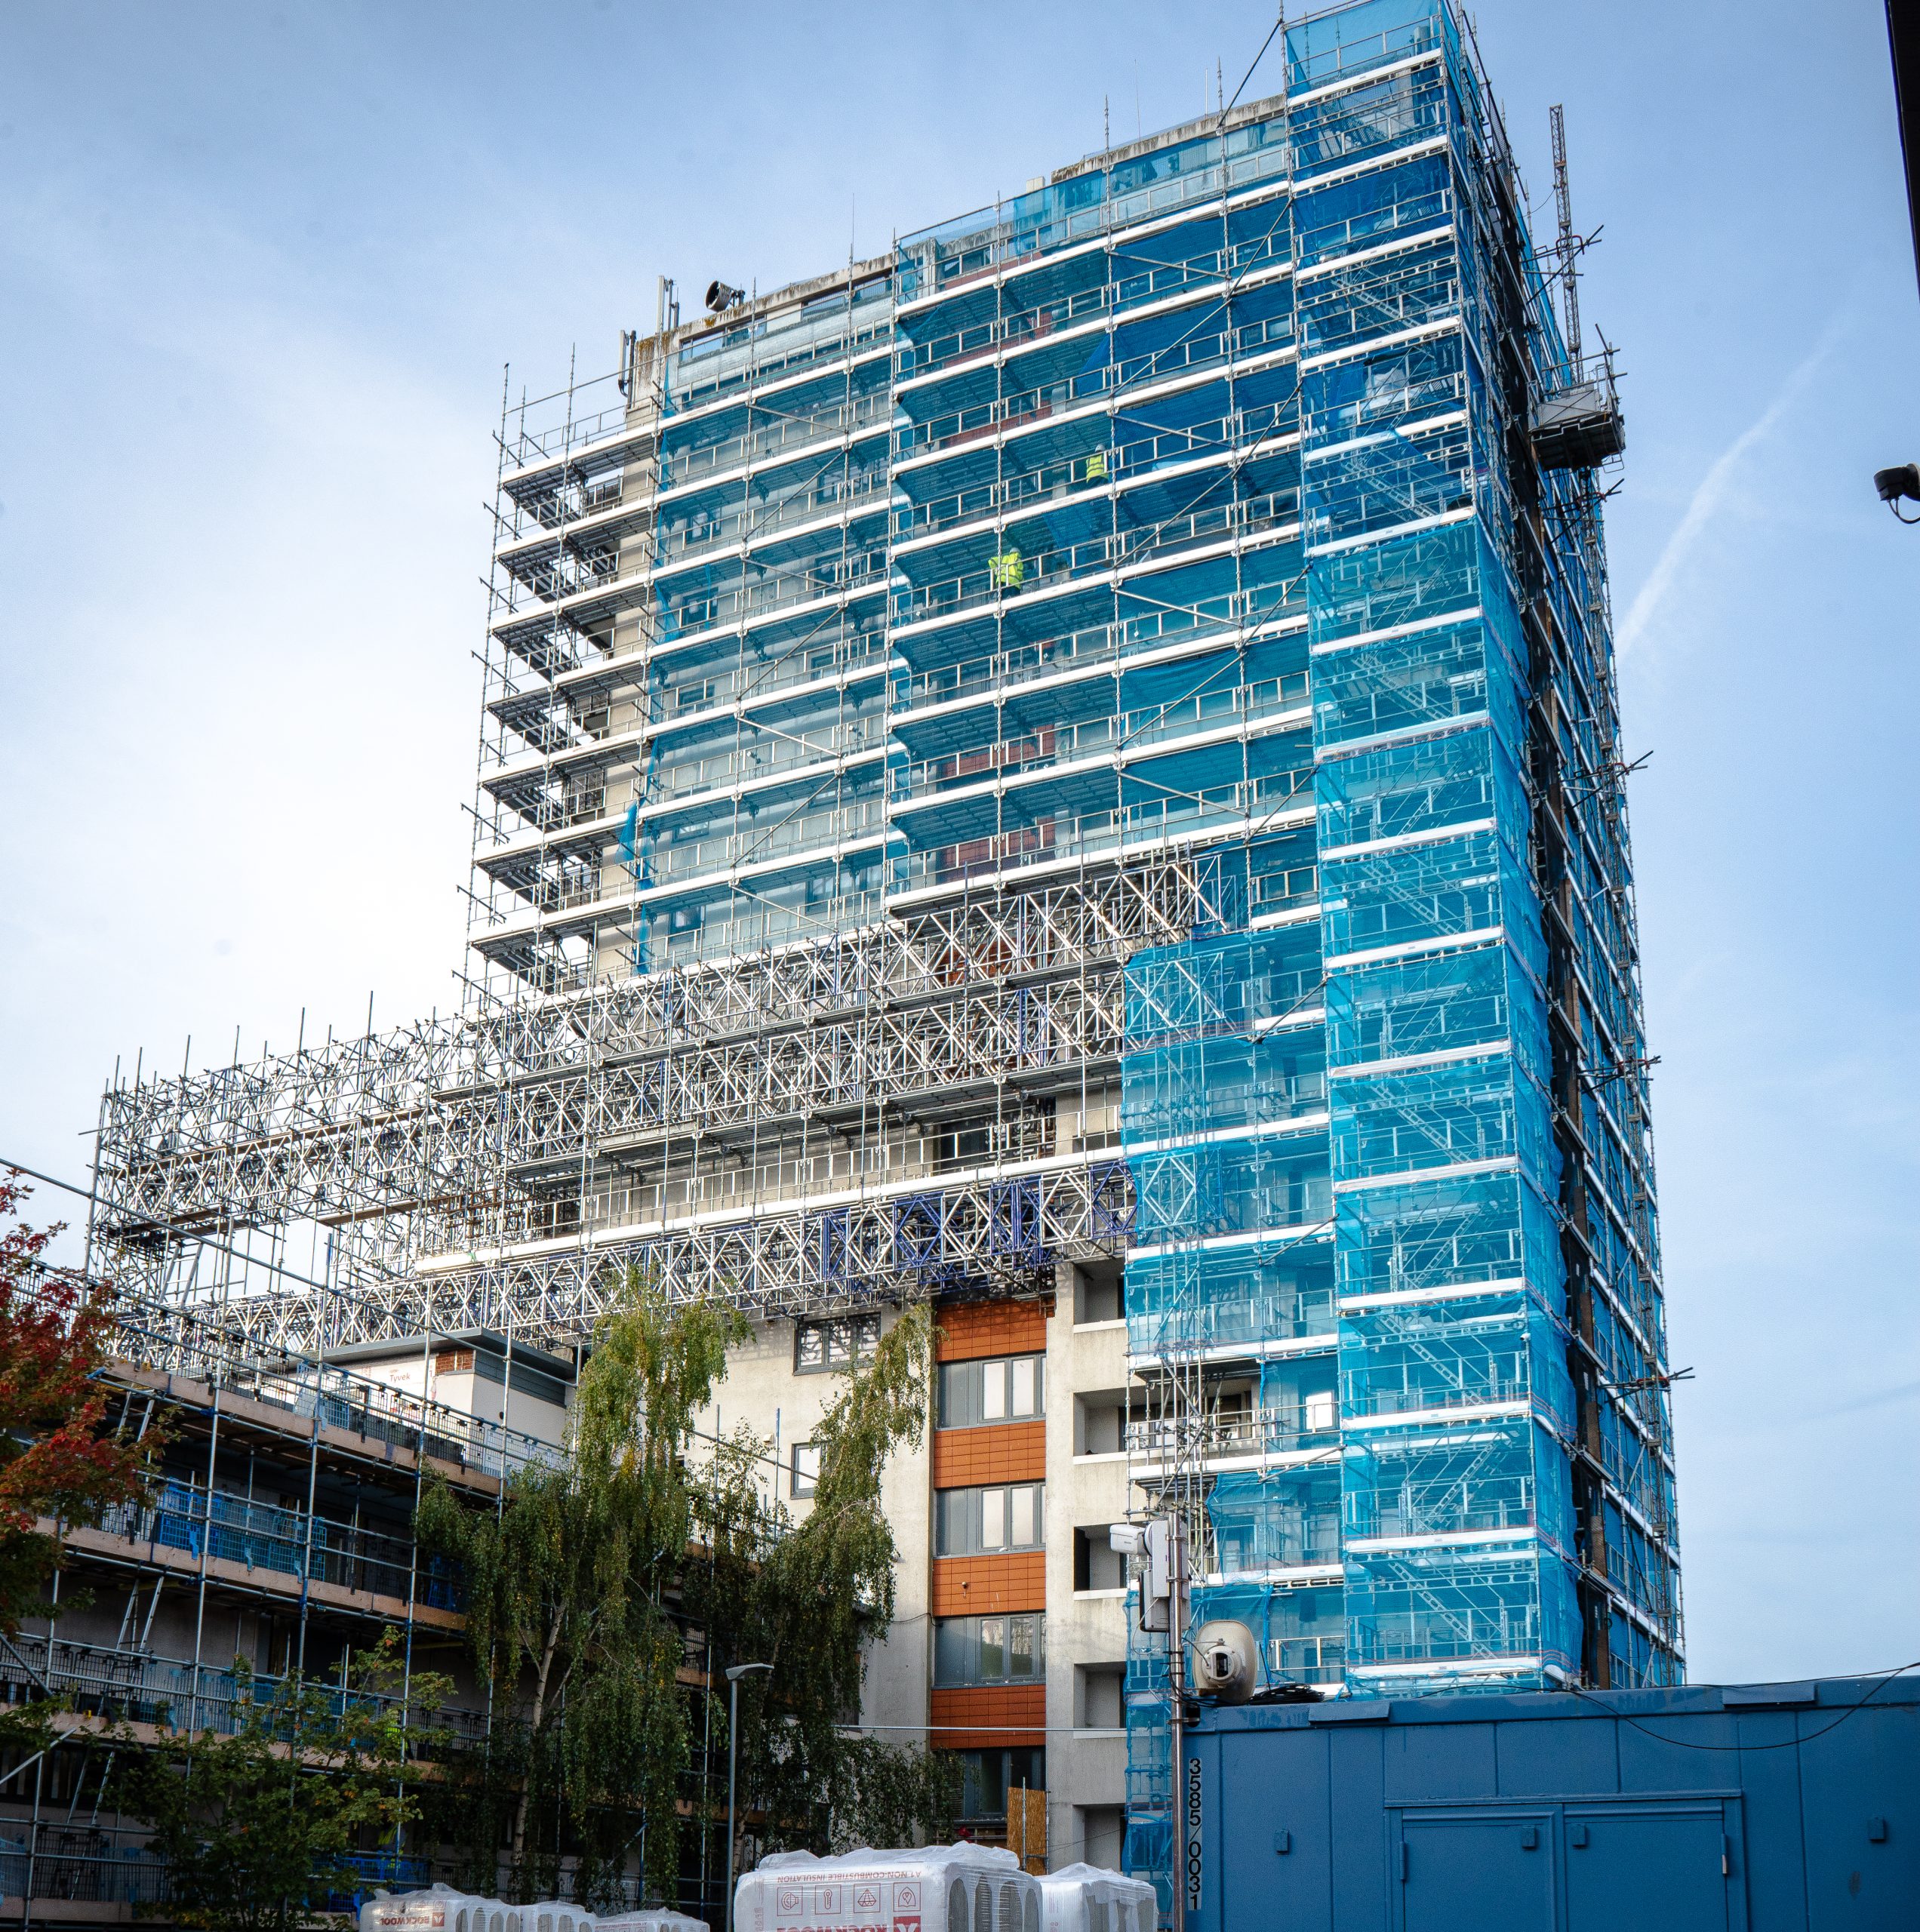 Park Side Court- Scaffolding for recladding of live building